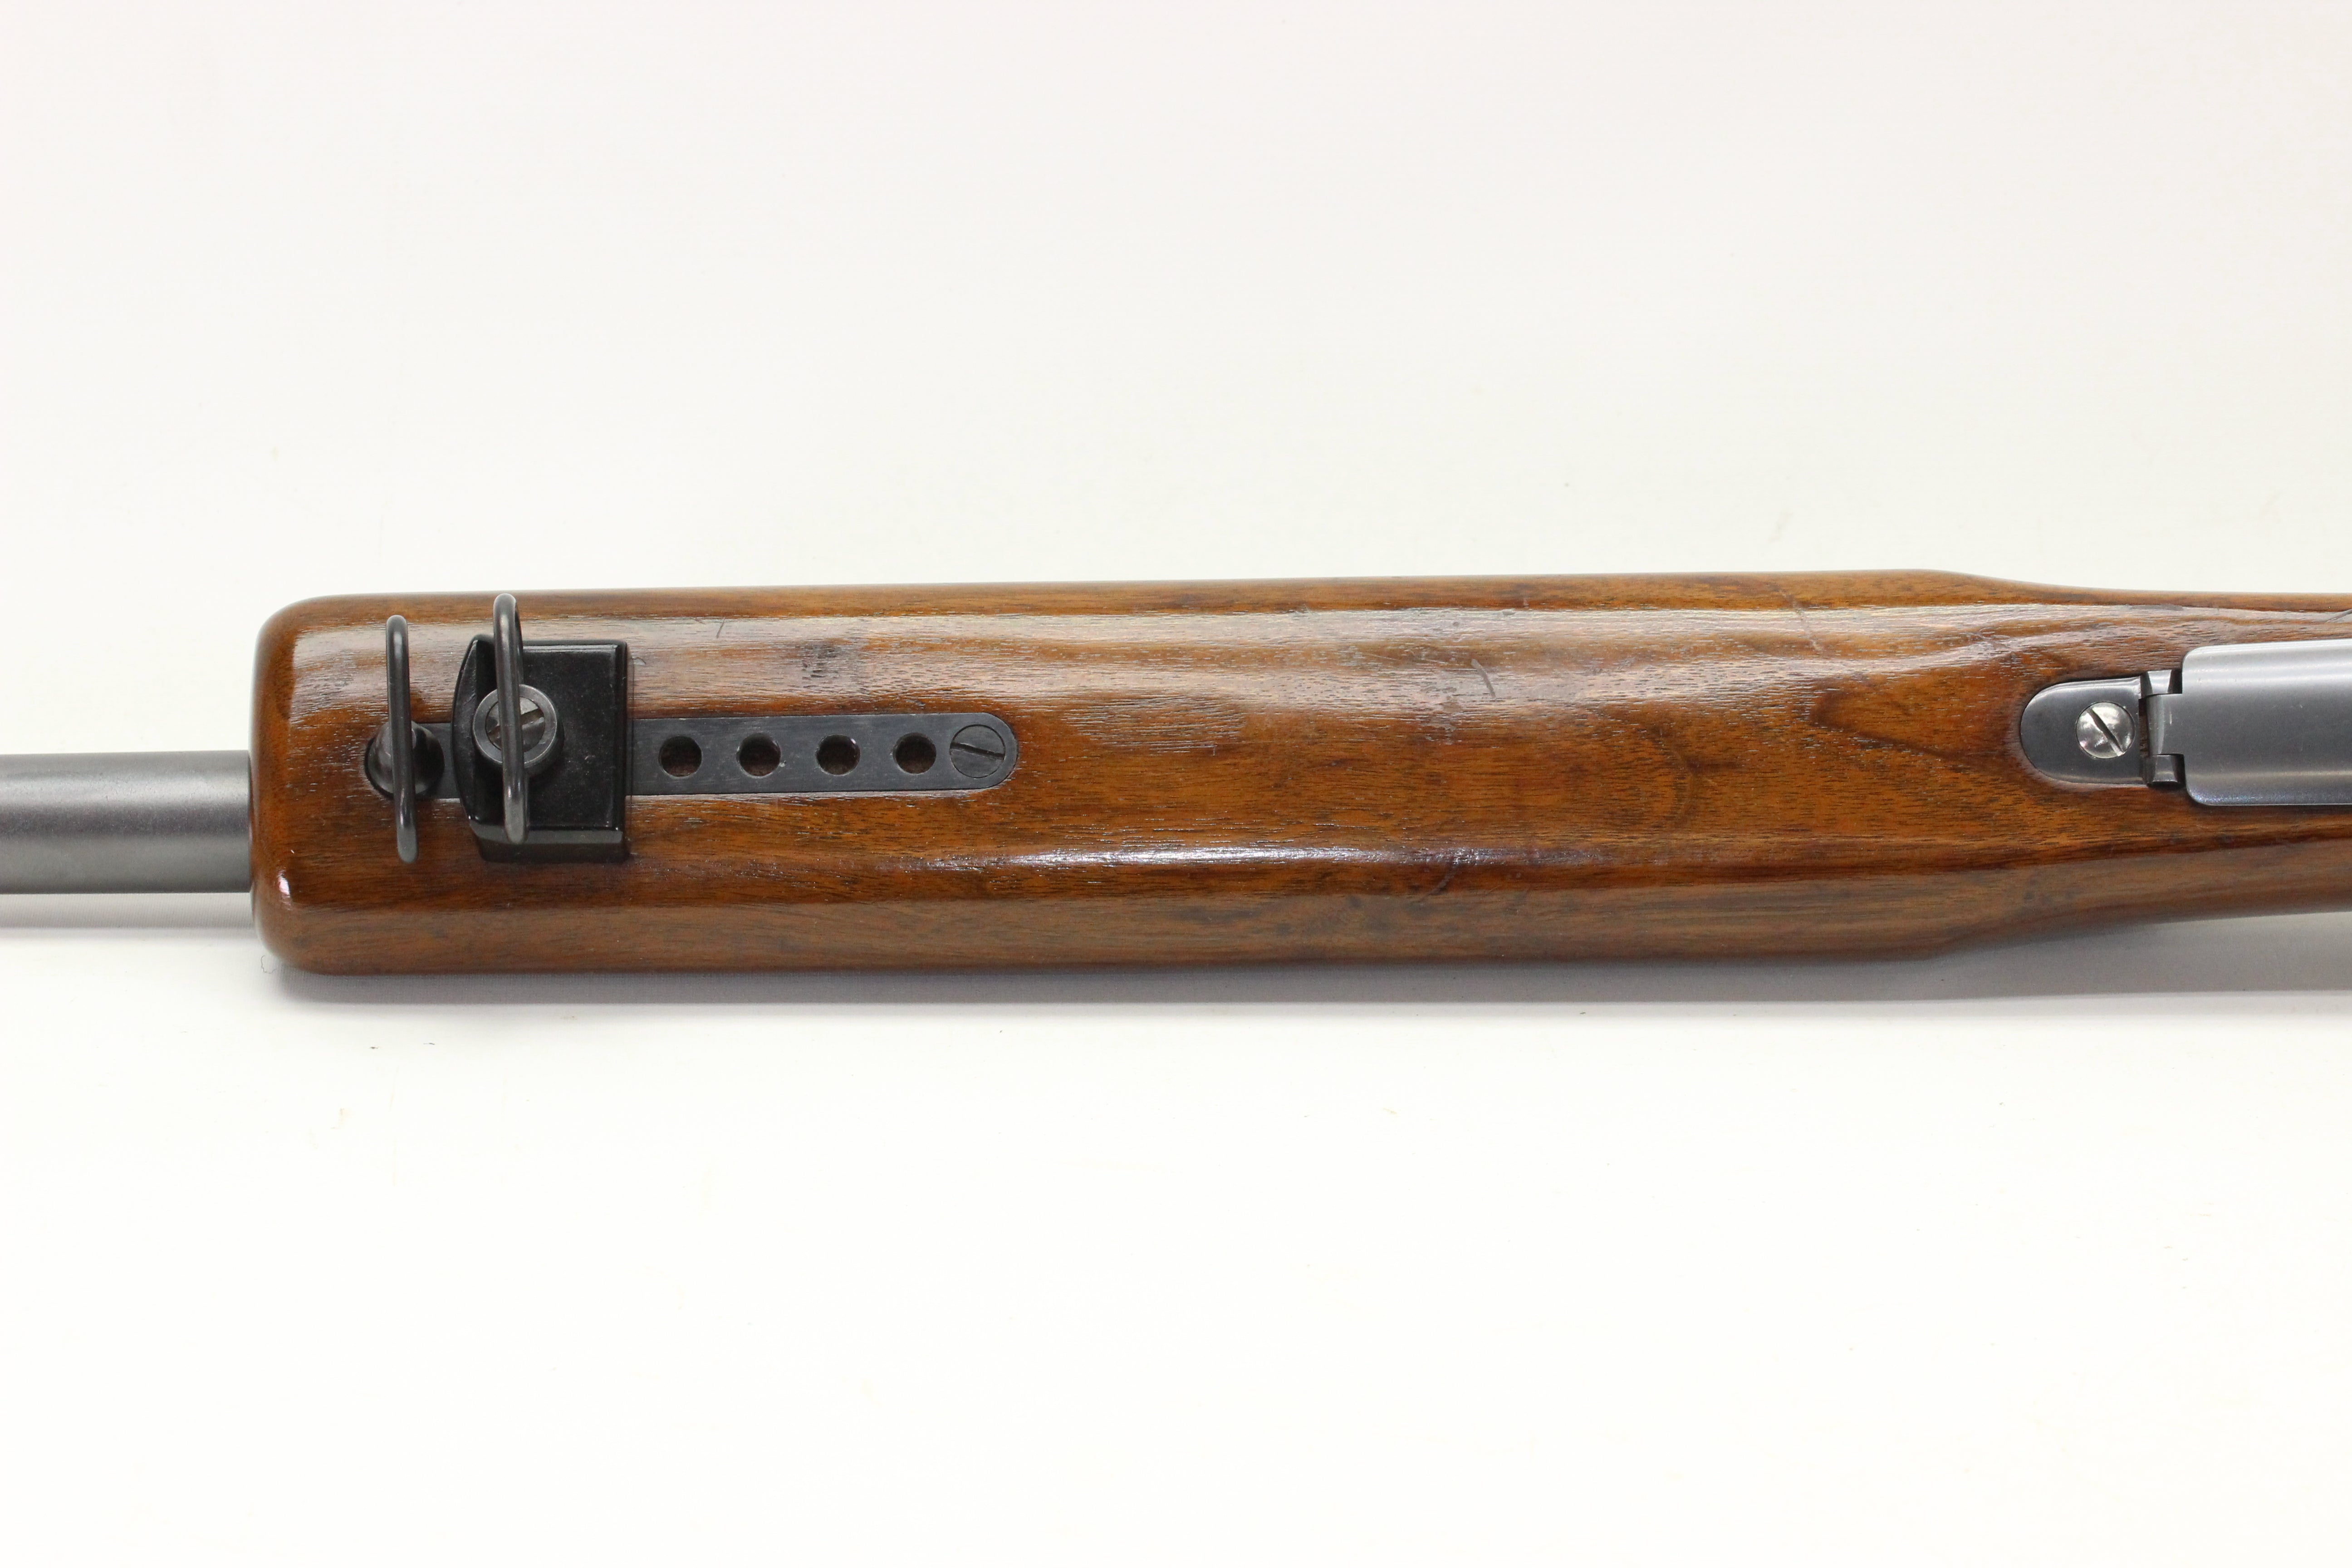 .220 Swift Target Rifle - Special Order - 1953